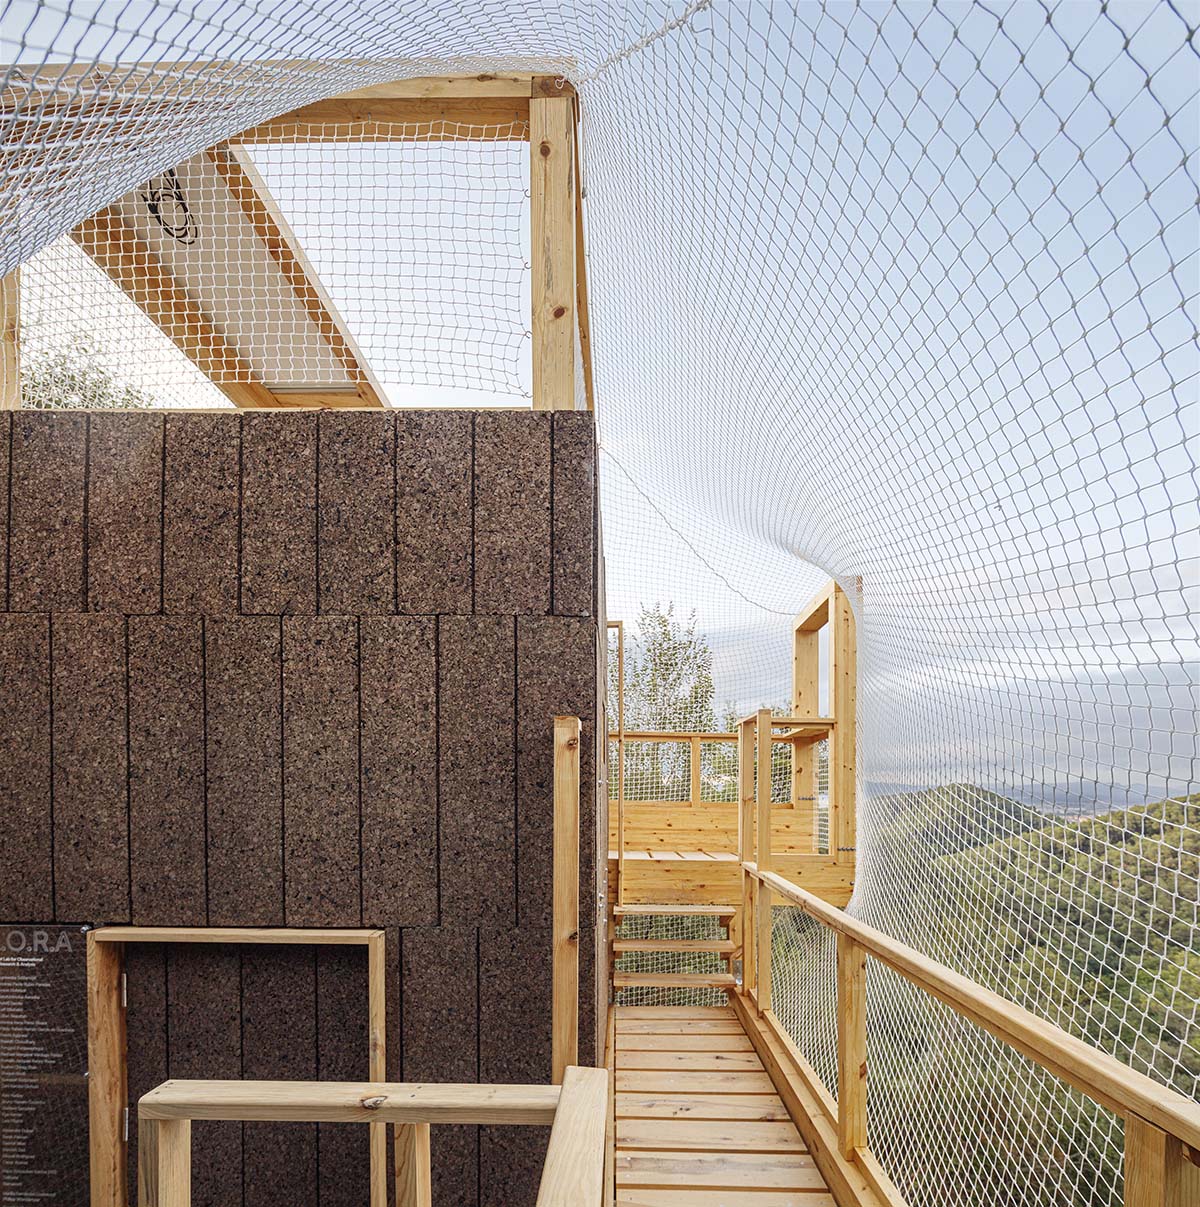 IAAC students built mass timber observatory based on 